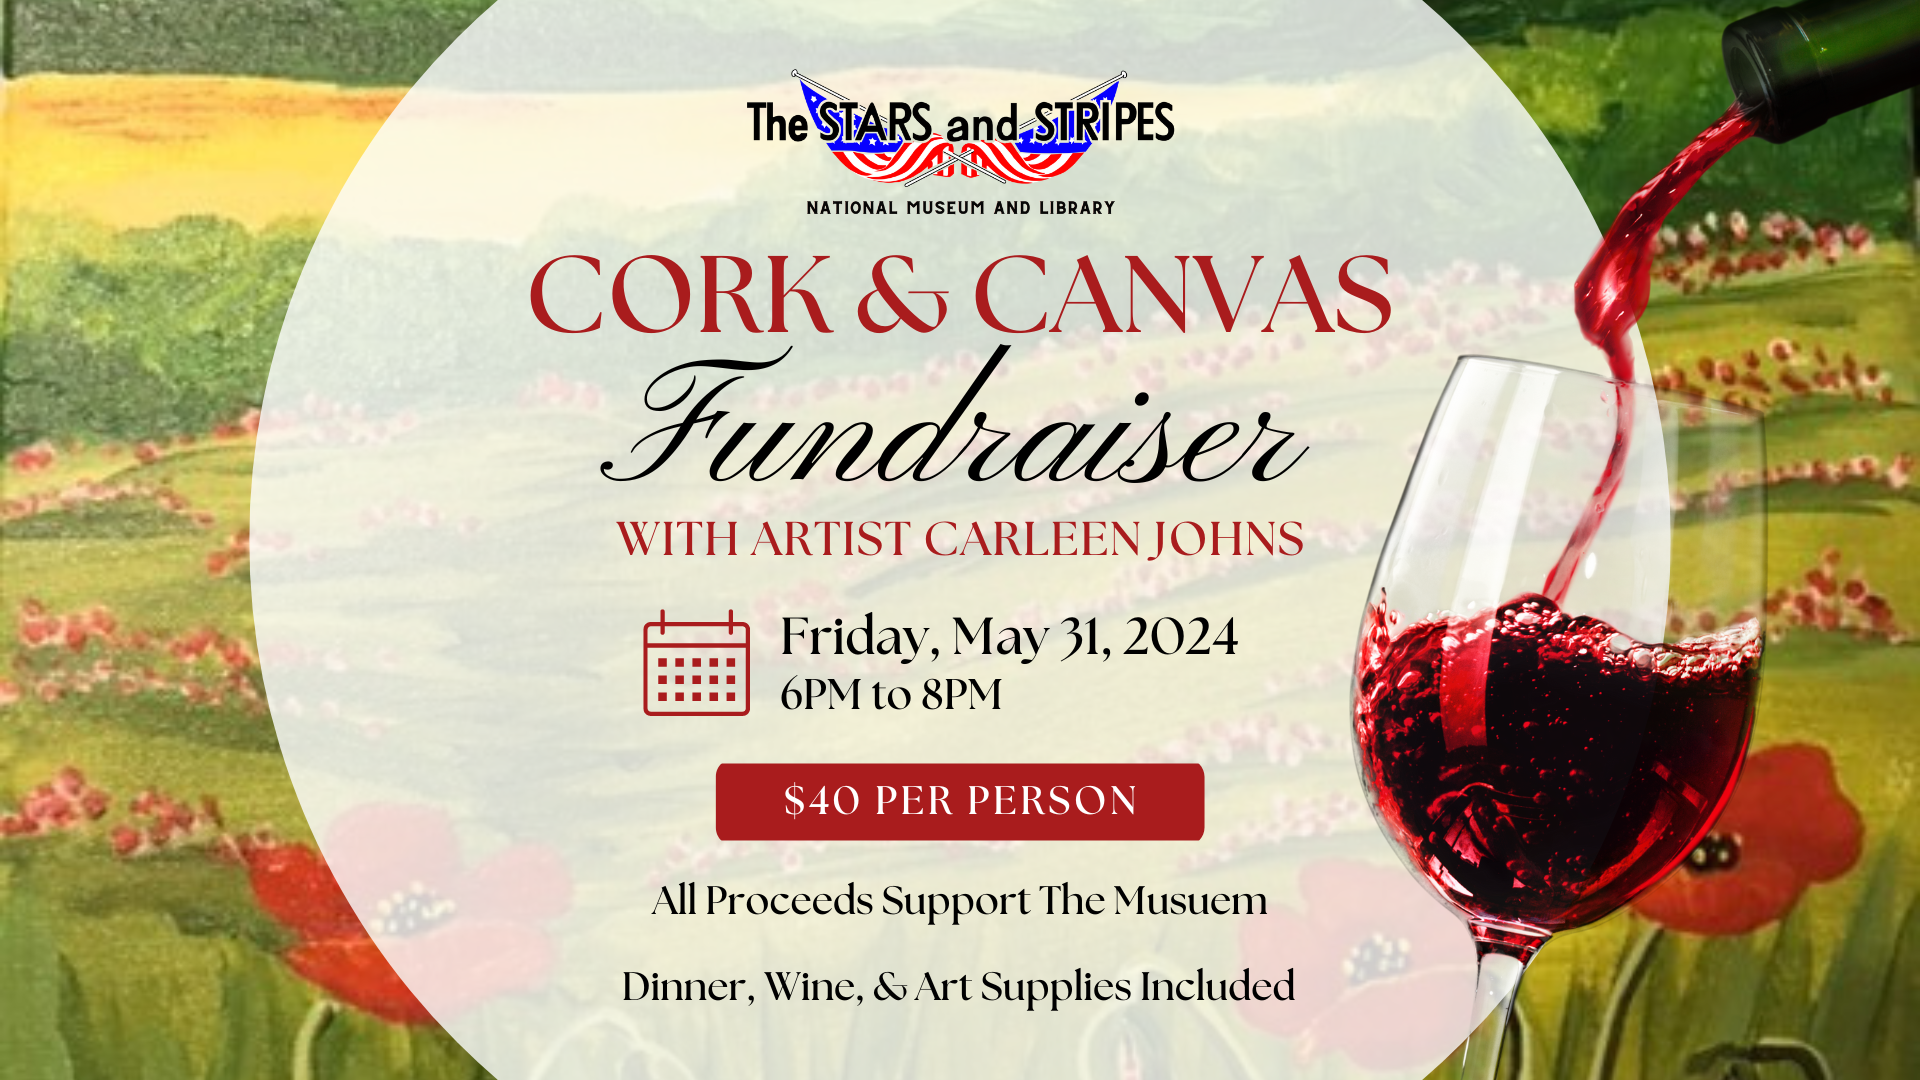 The Cork and Canvas Fundraiser with Artist Carleen Johns will be held on Friday May 31 2024 from 6 pm to 8pm at The Stars and Stripes National Museum and Library